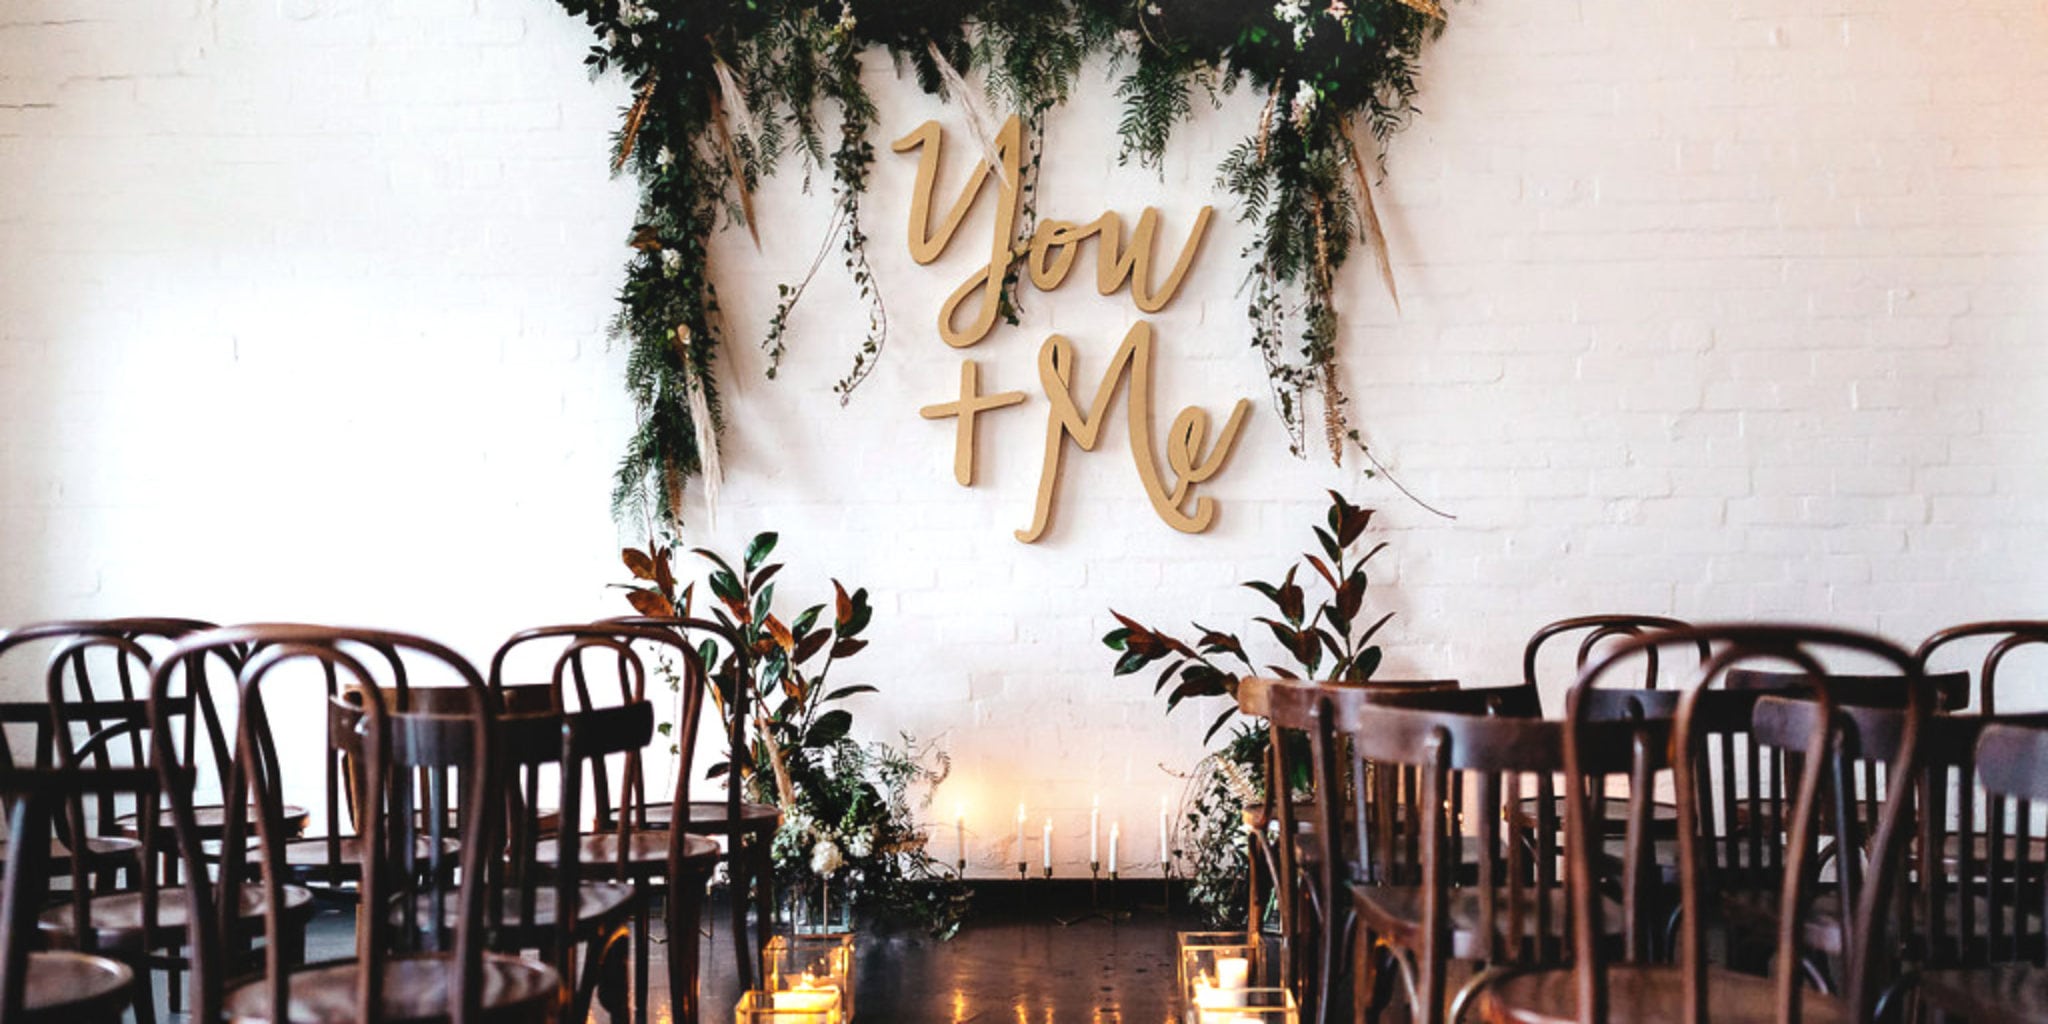 Ceremony backdrops are on trend for weddings.